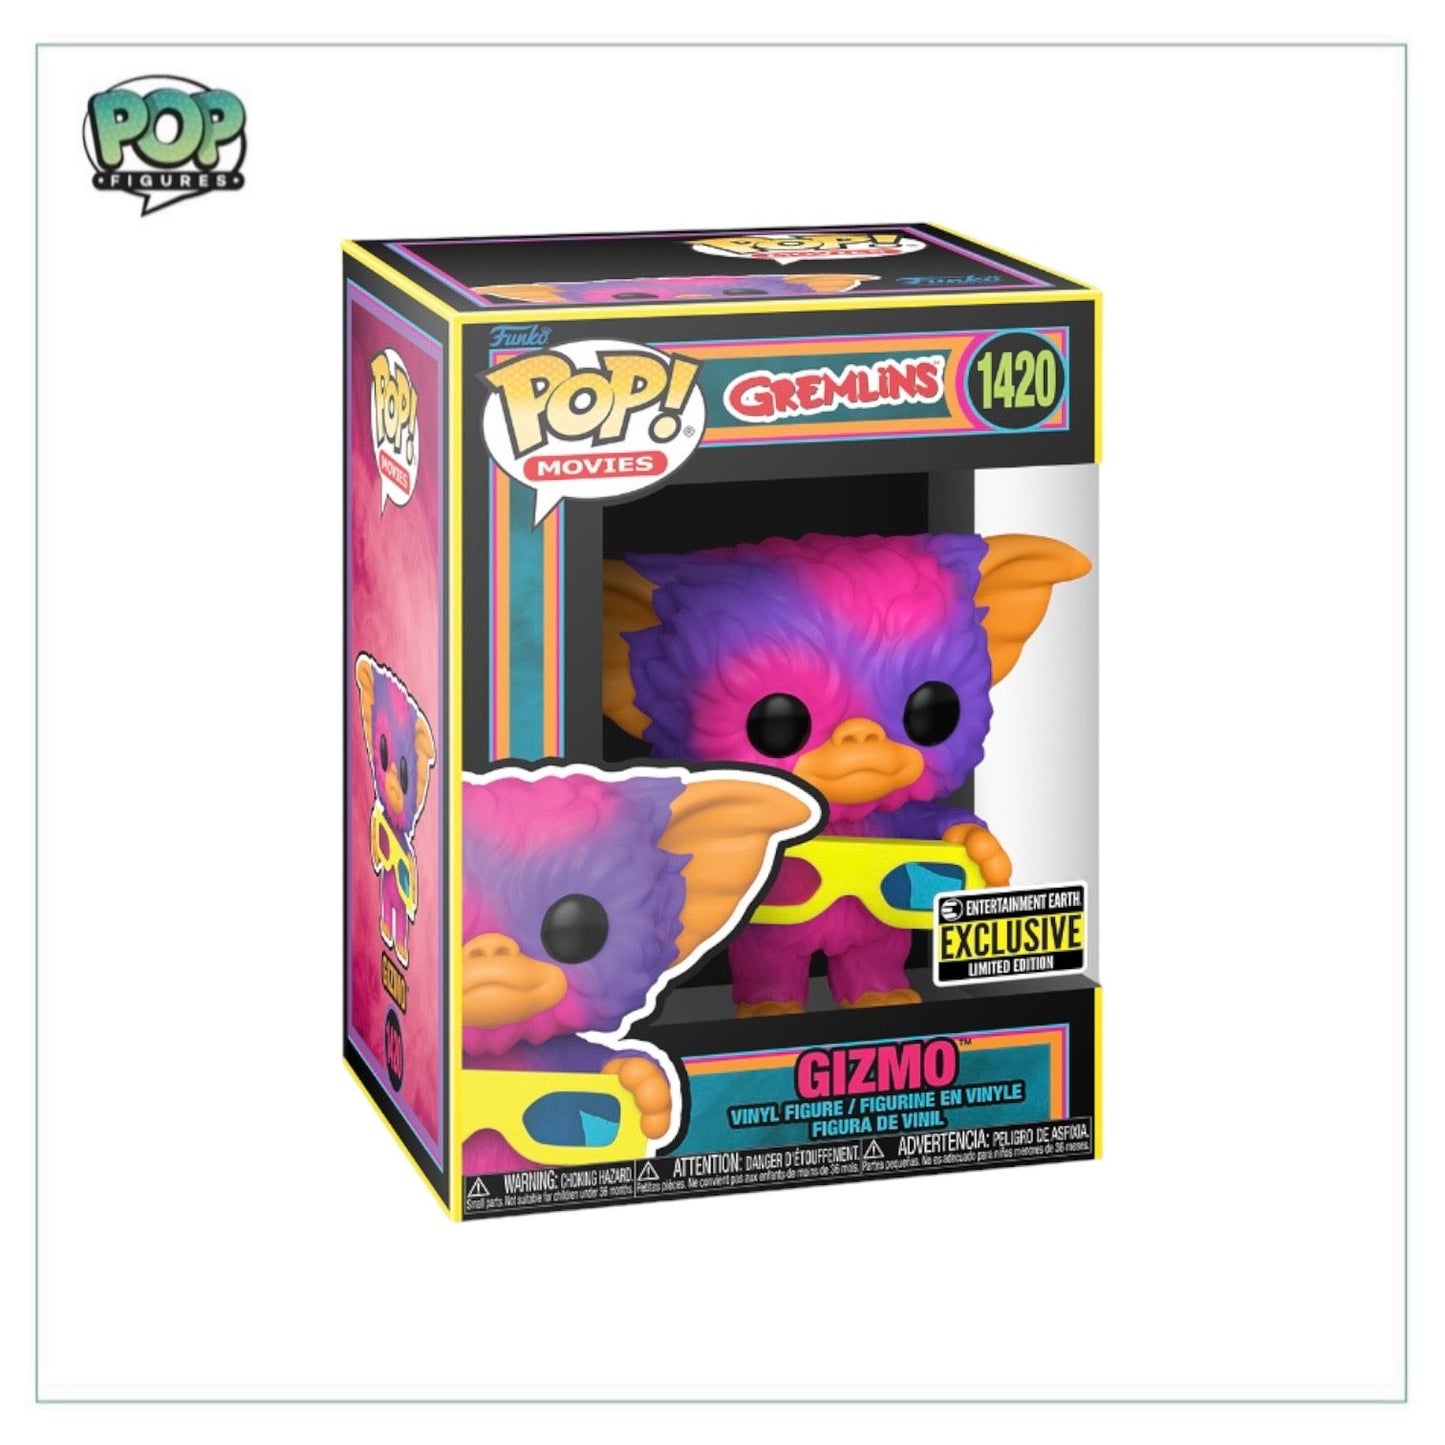 Gizmo #1420 (Black Light) Funko Pop! - Gremlins - Entertainment Earth Exclusive - Angry Cat